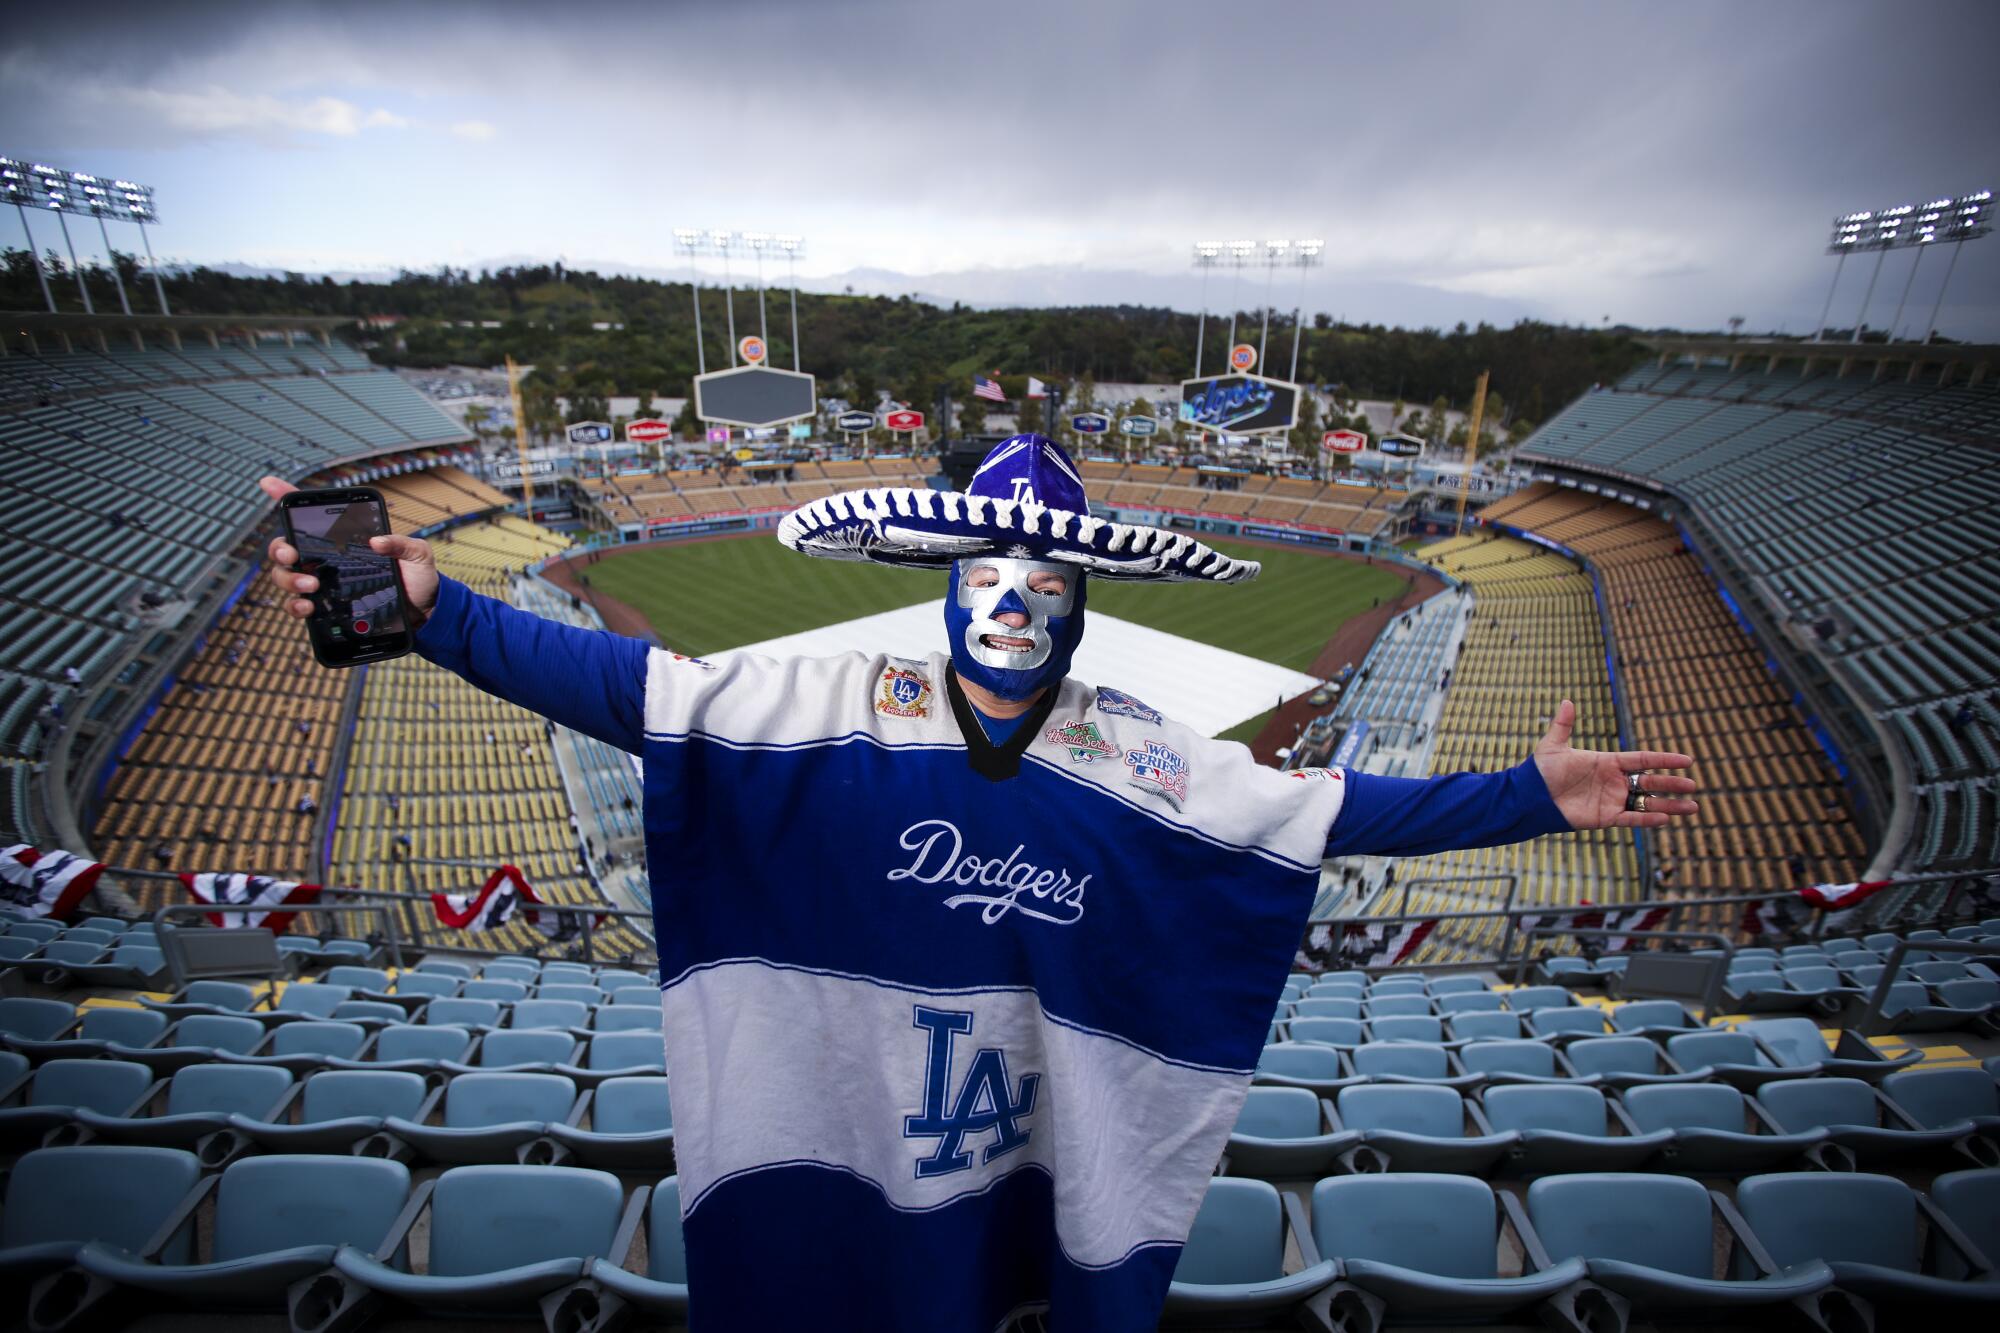  A man wearing a Dodgers serape, lucha libre mask and sombrero spreads his arms in the Dodger Stadium stands